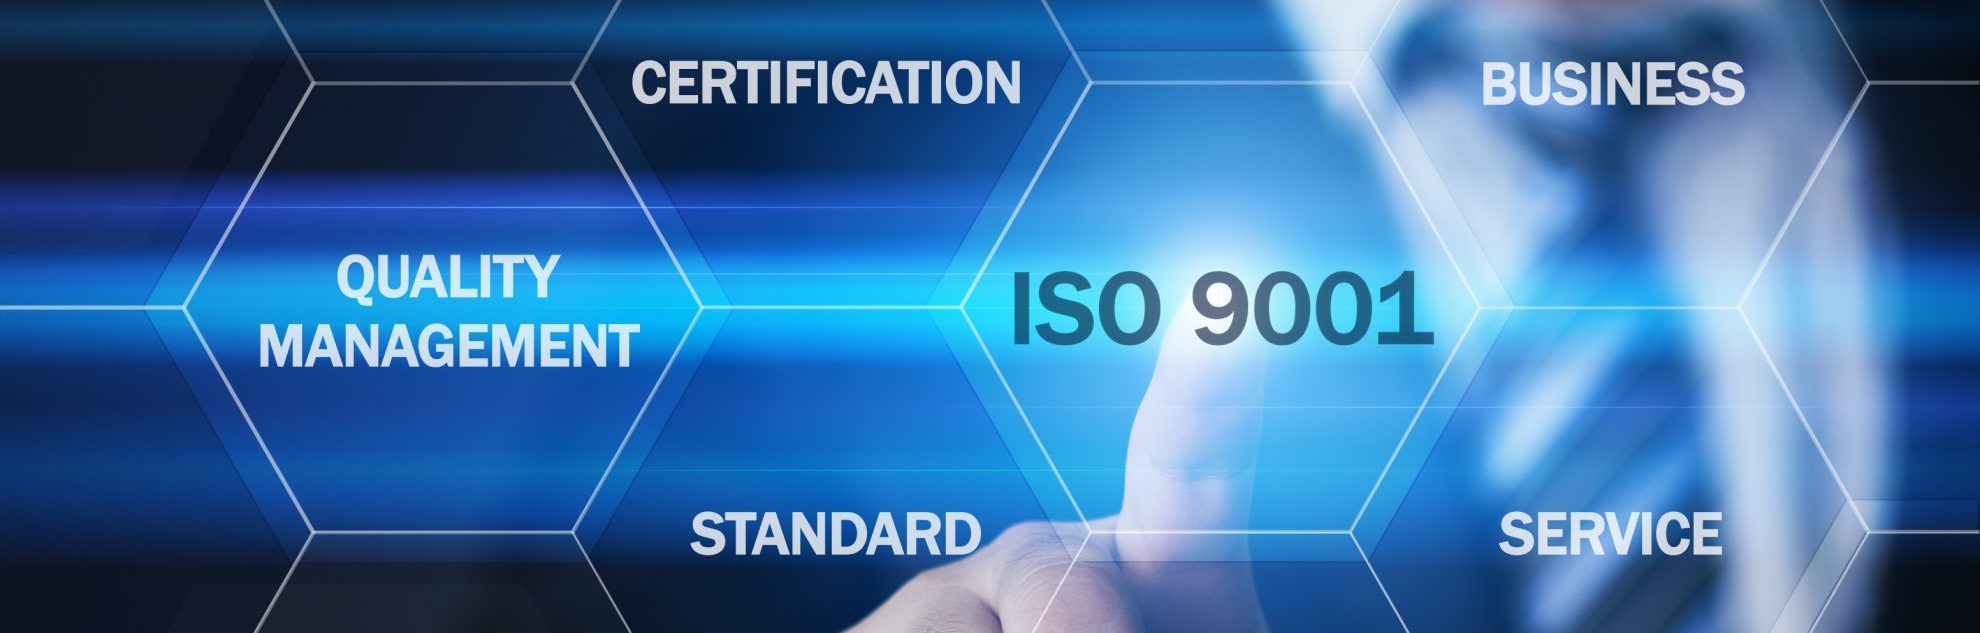 9001 iso certification